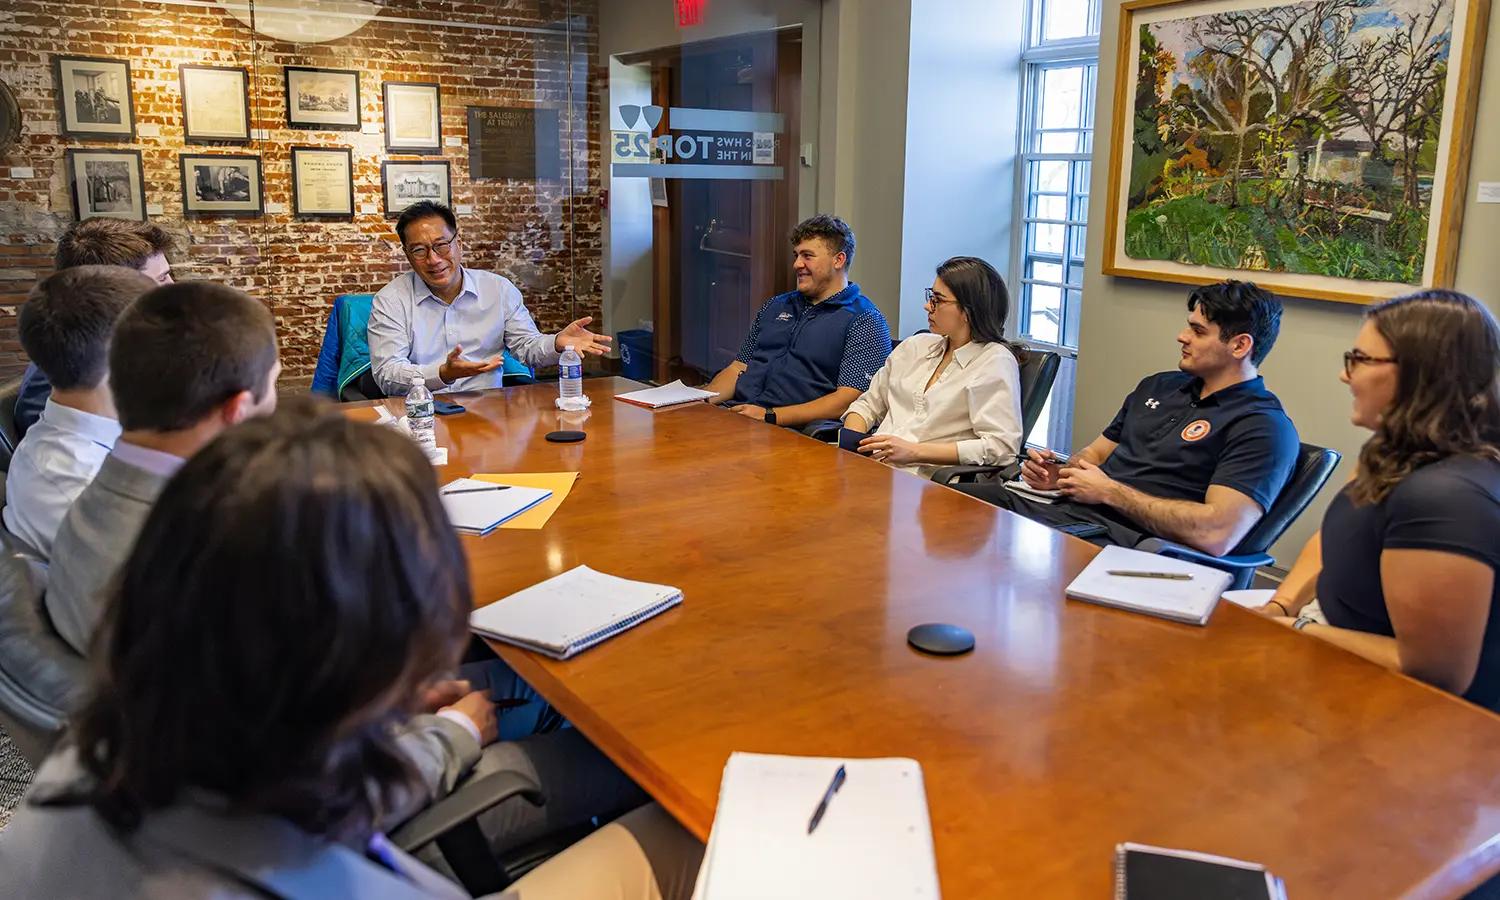 Chairman of Investment Banking at Goldman Sachs, Stephen Wong ’89 leads a roundtable discussion with students interested in finance at the Salisbury Center.